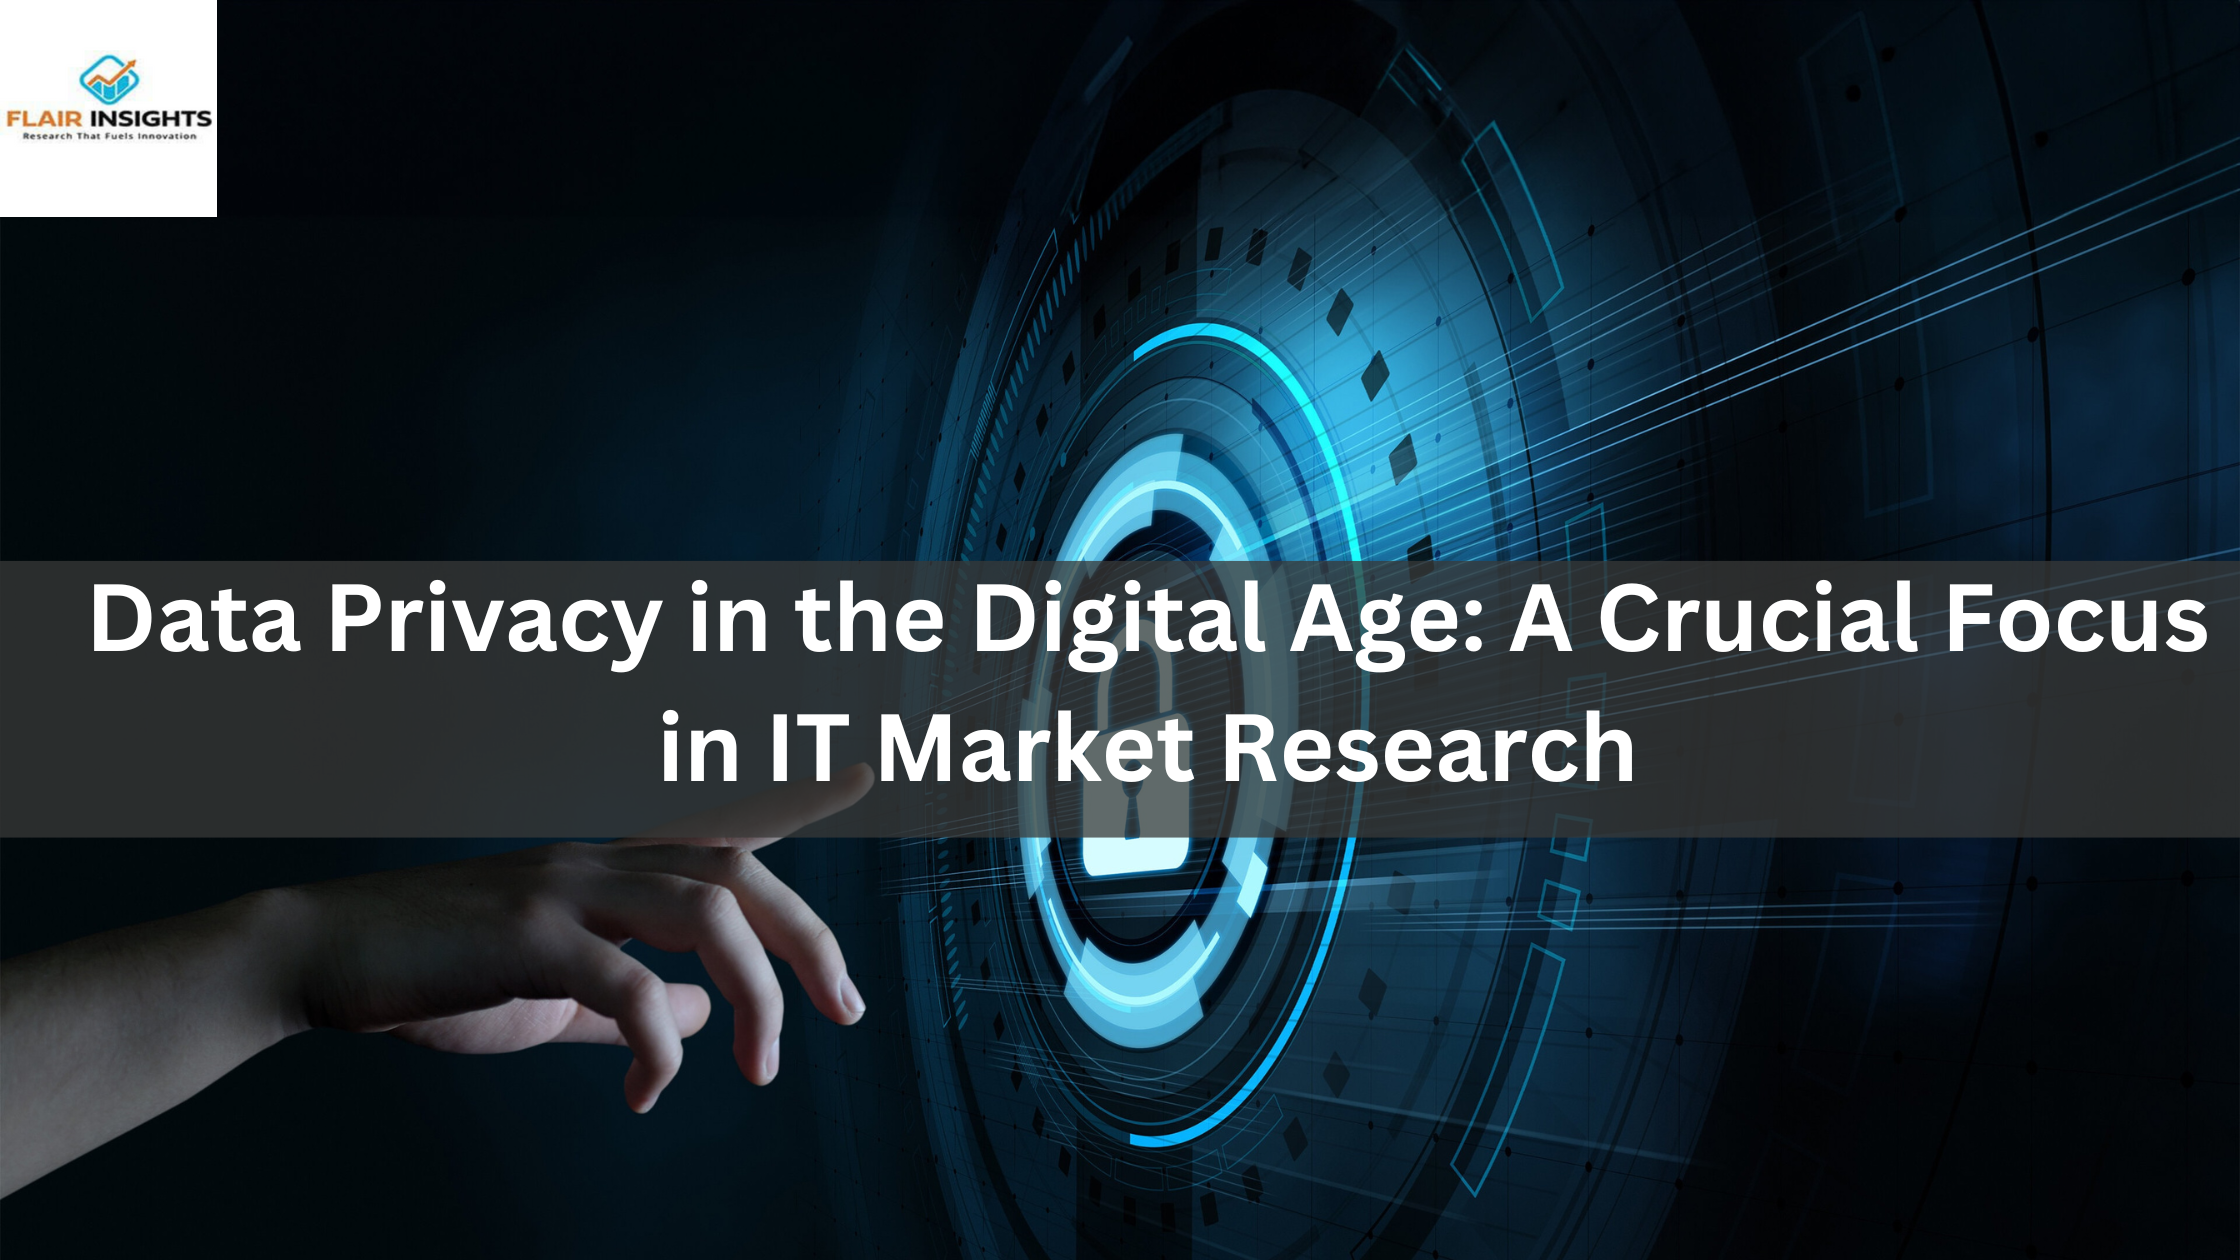 Data Privacy in the Digital Age: A Crucial Focus in IT Market Research